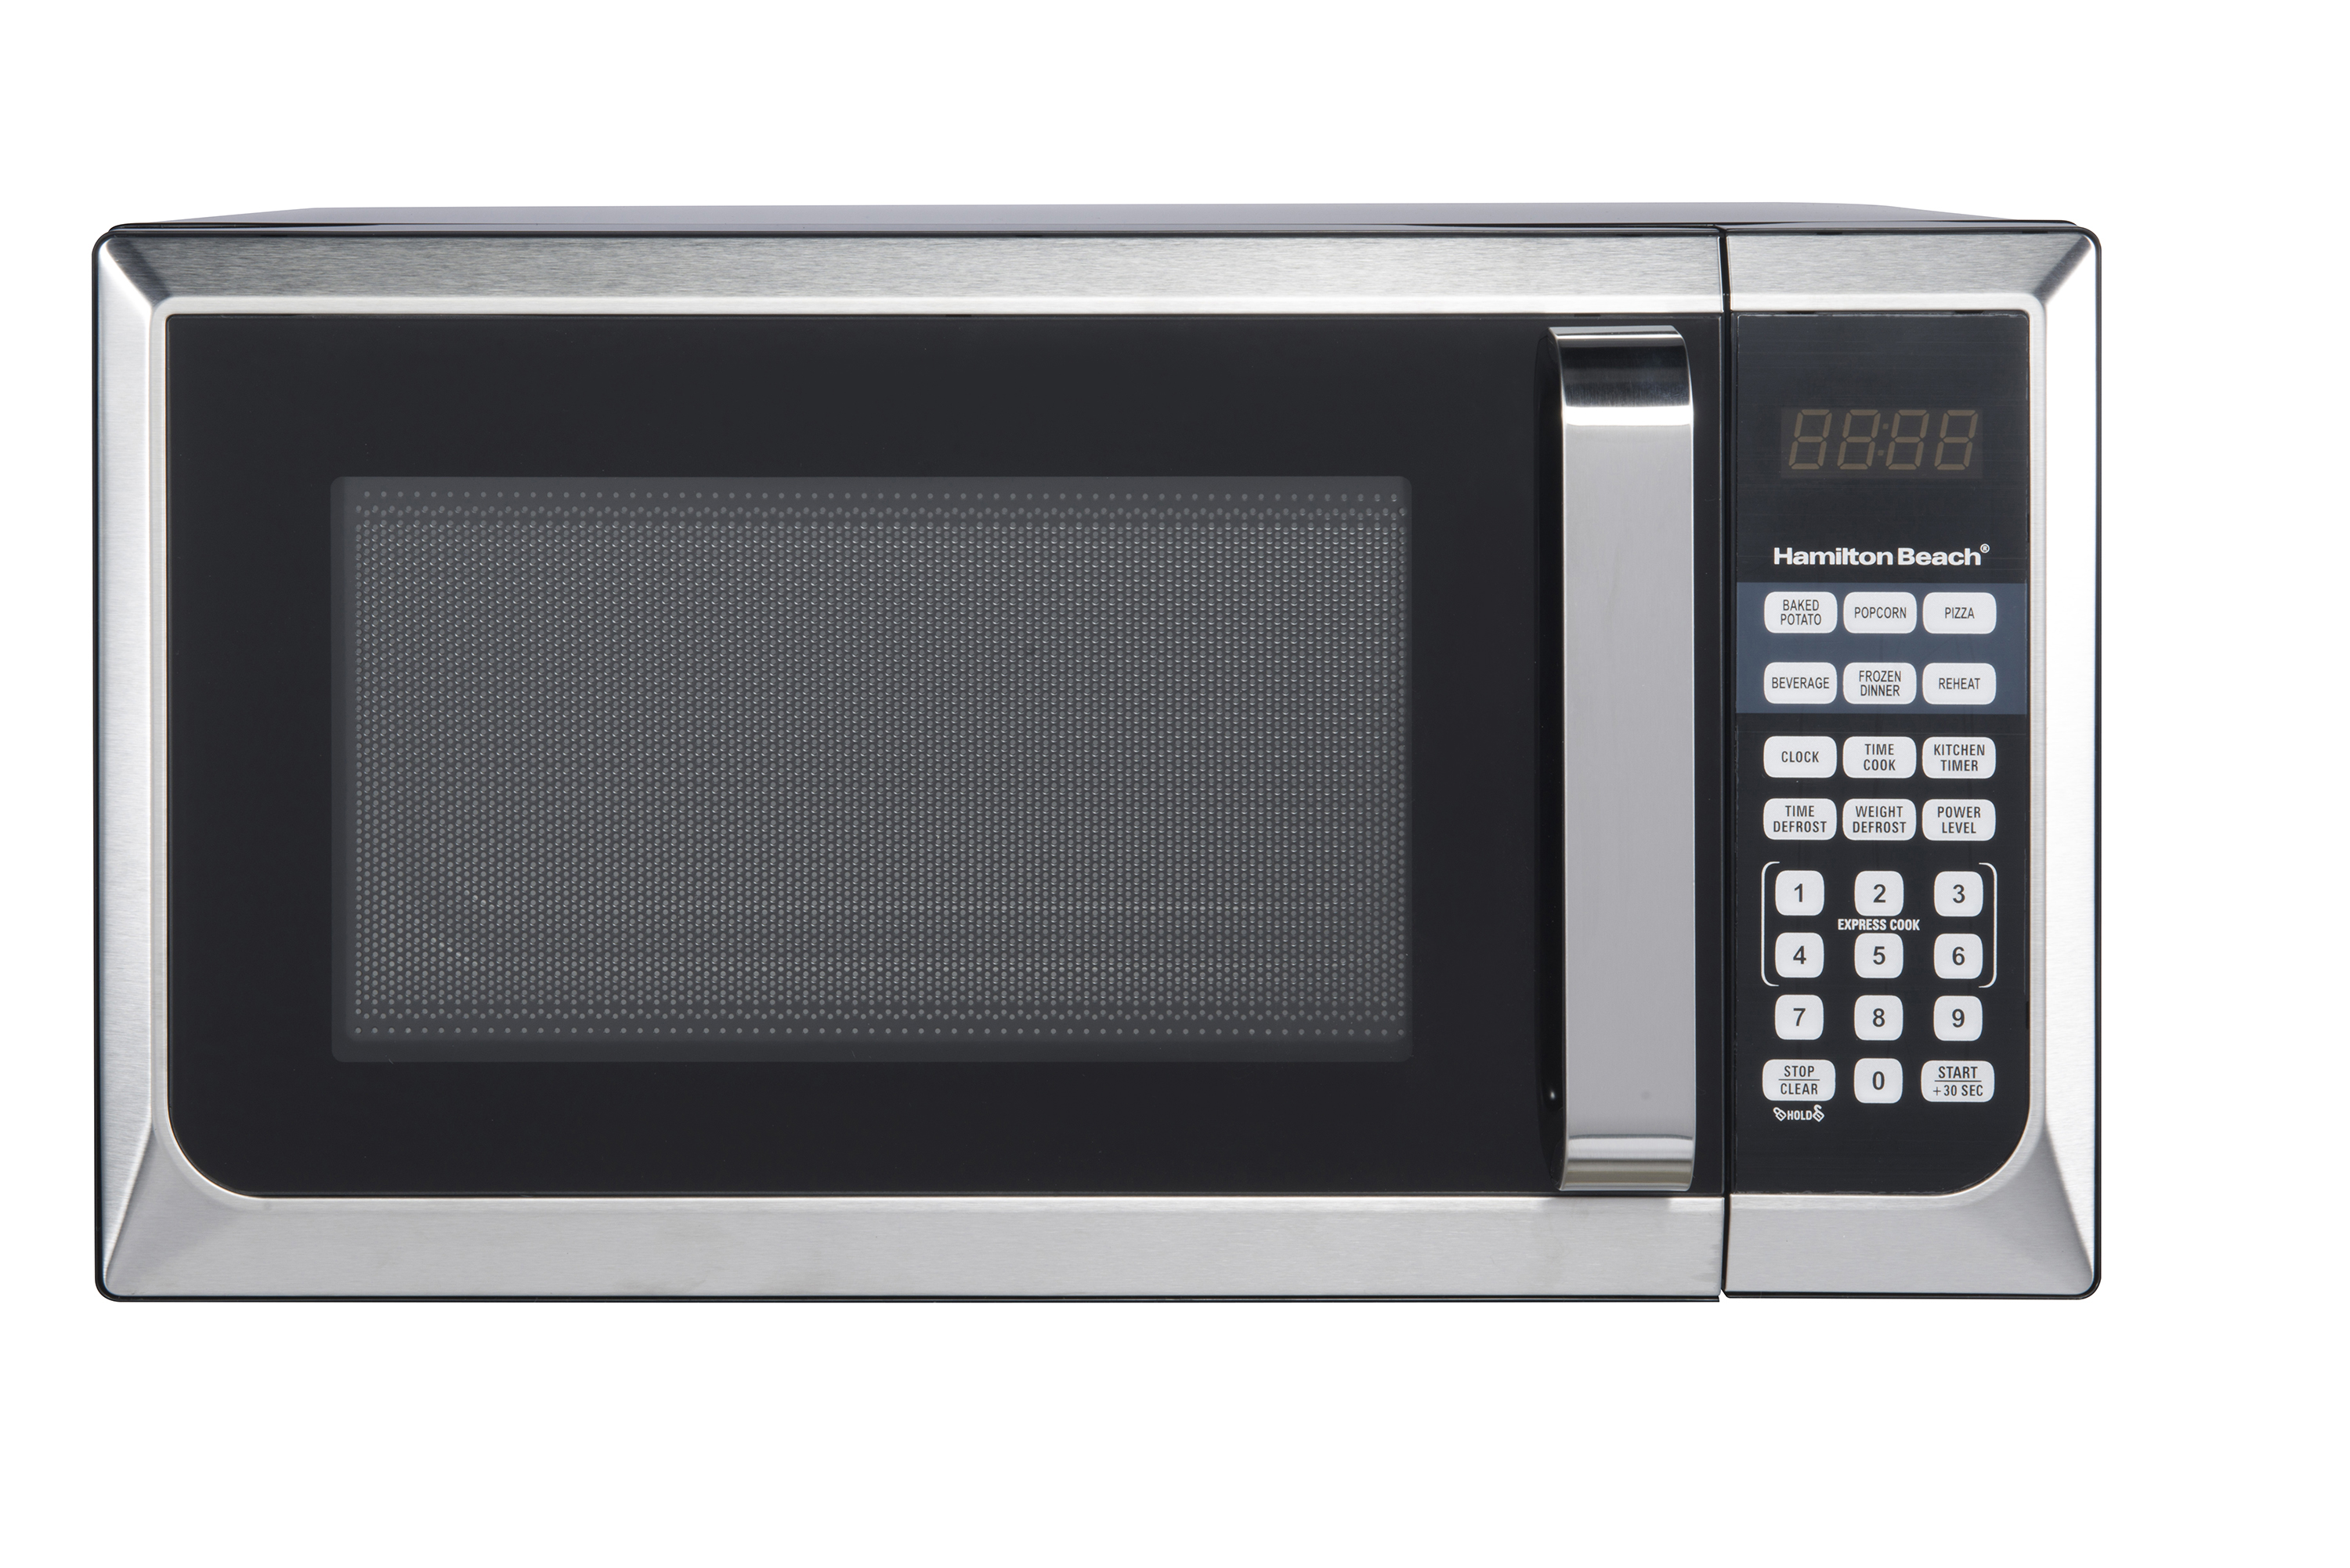 Hamilton Beach 0.9 Cu ft Countertop Microwave Oven in Stainless Steel, New - image 2 of 7